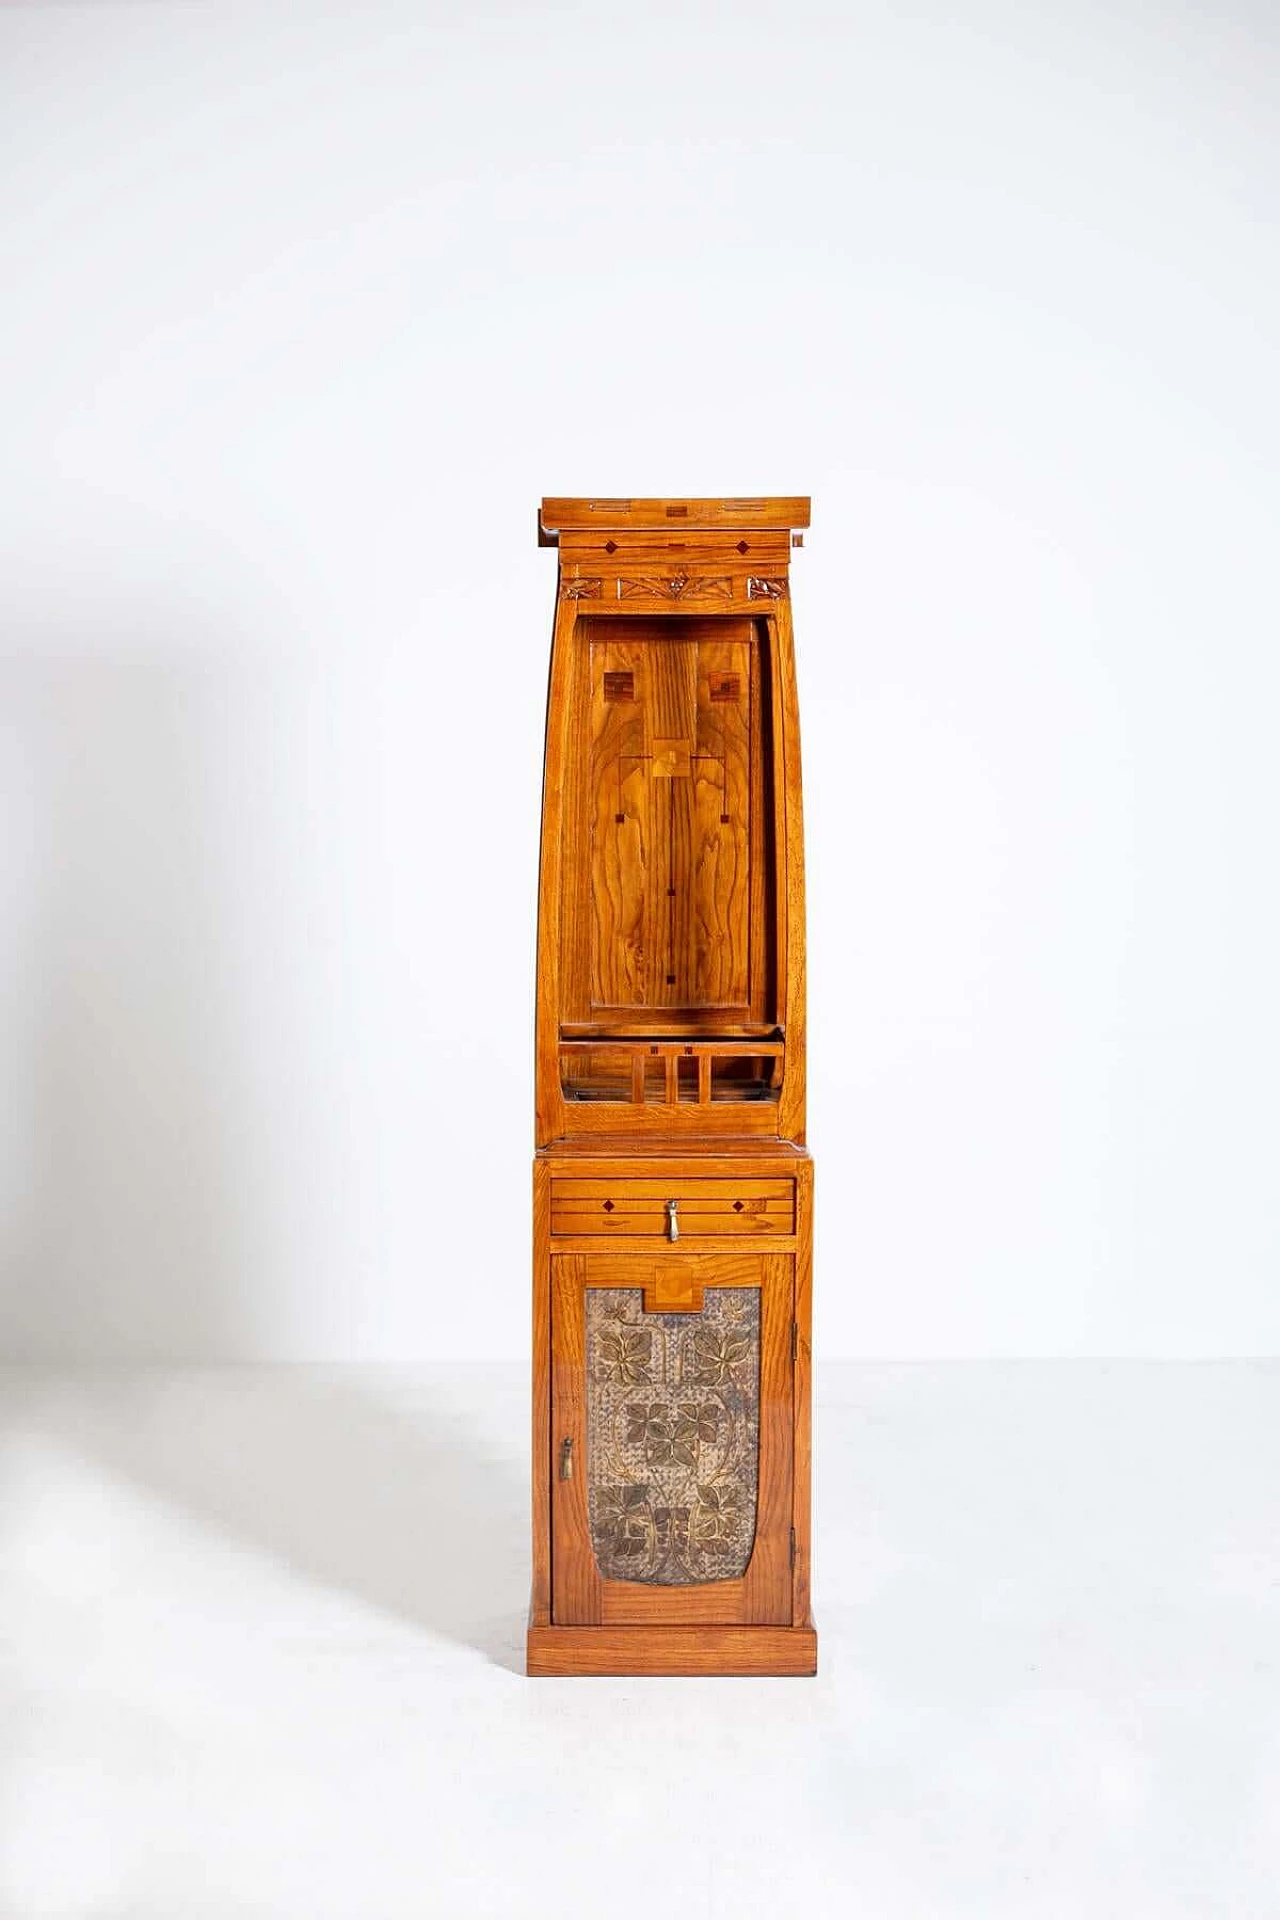 Carved wooden cabinet in Art Nouveau style, 20th century 1403423